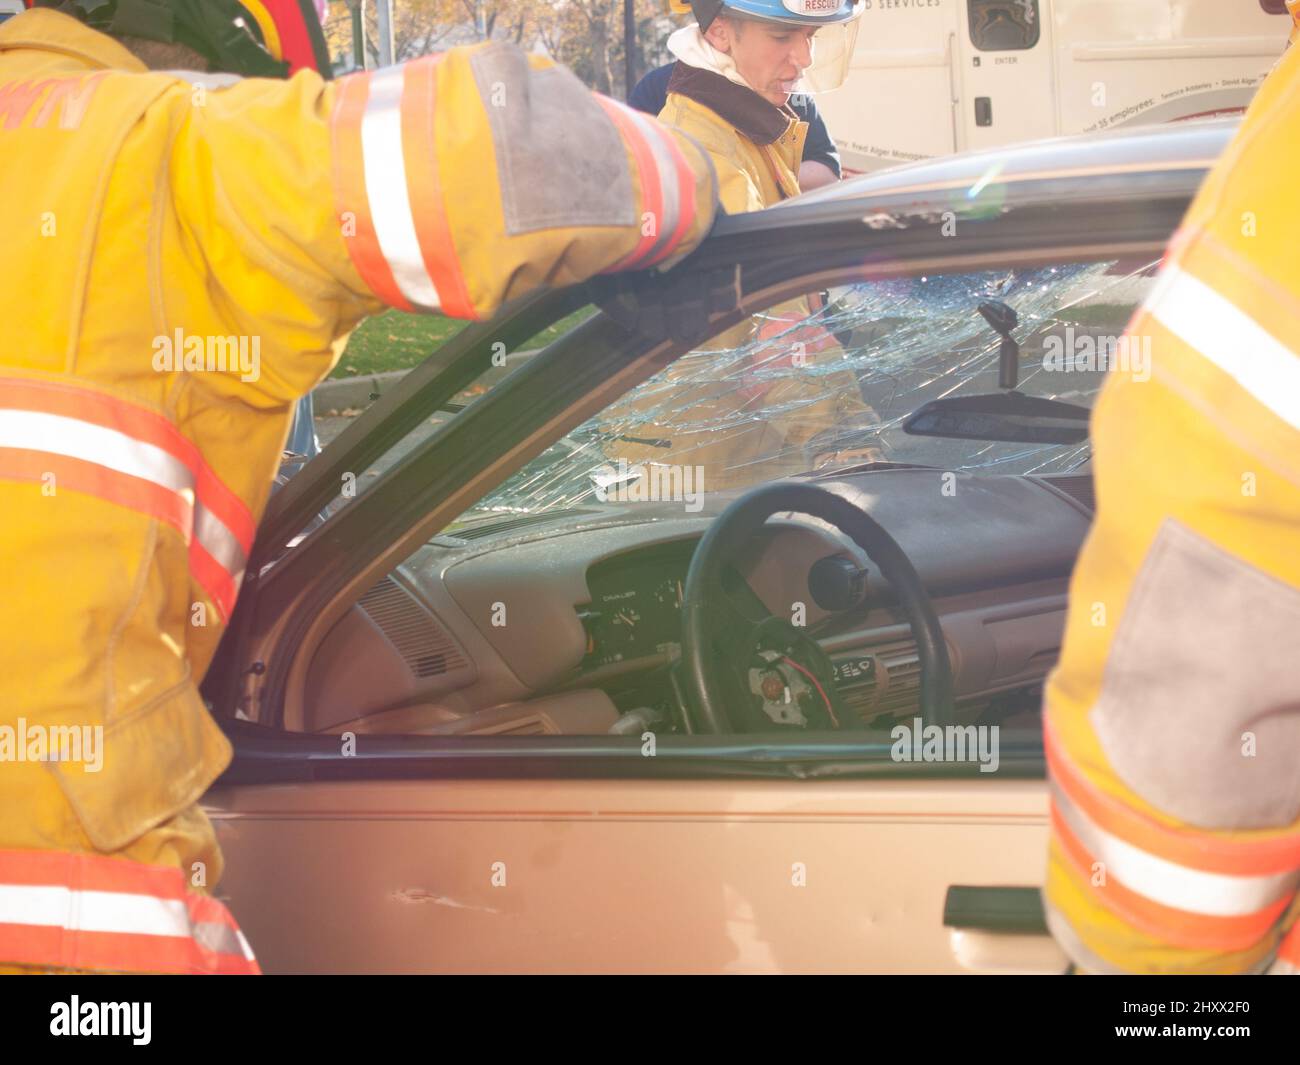 Rescue worker with wrecked car during drill Stock Photo